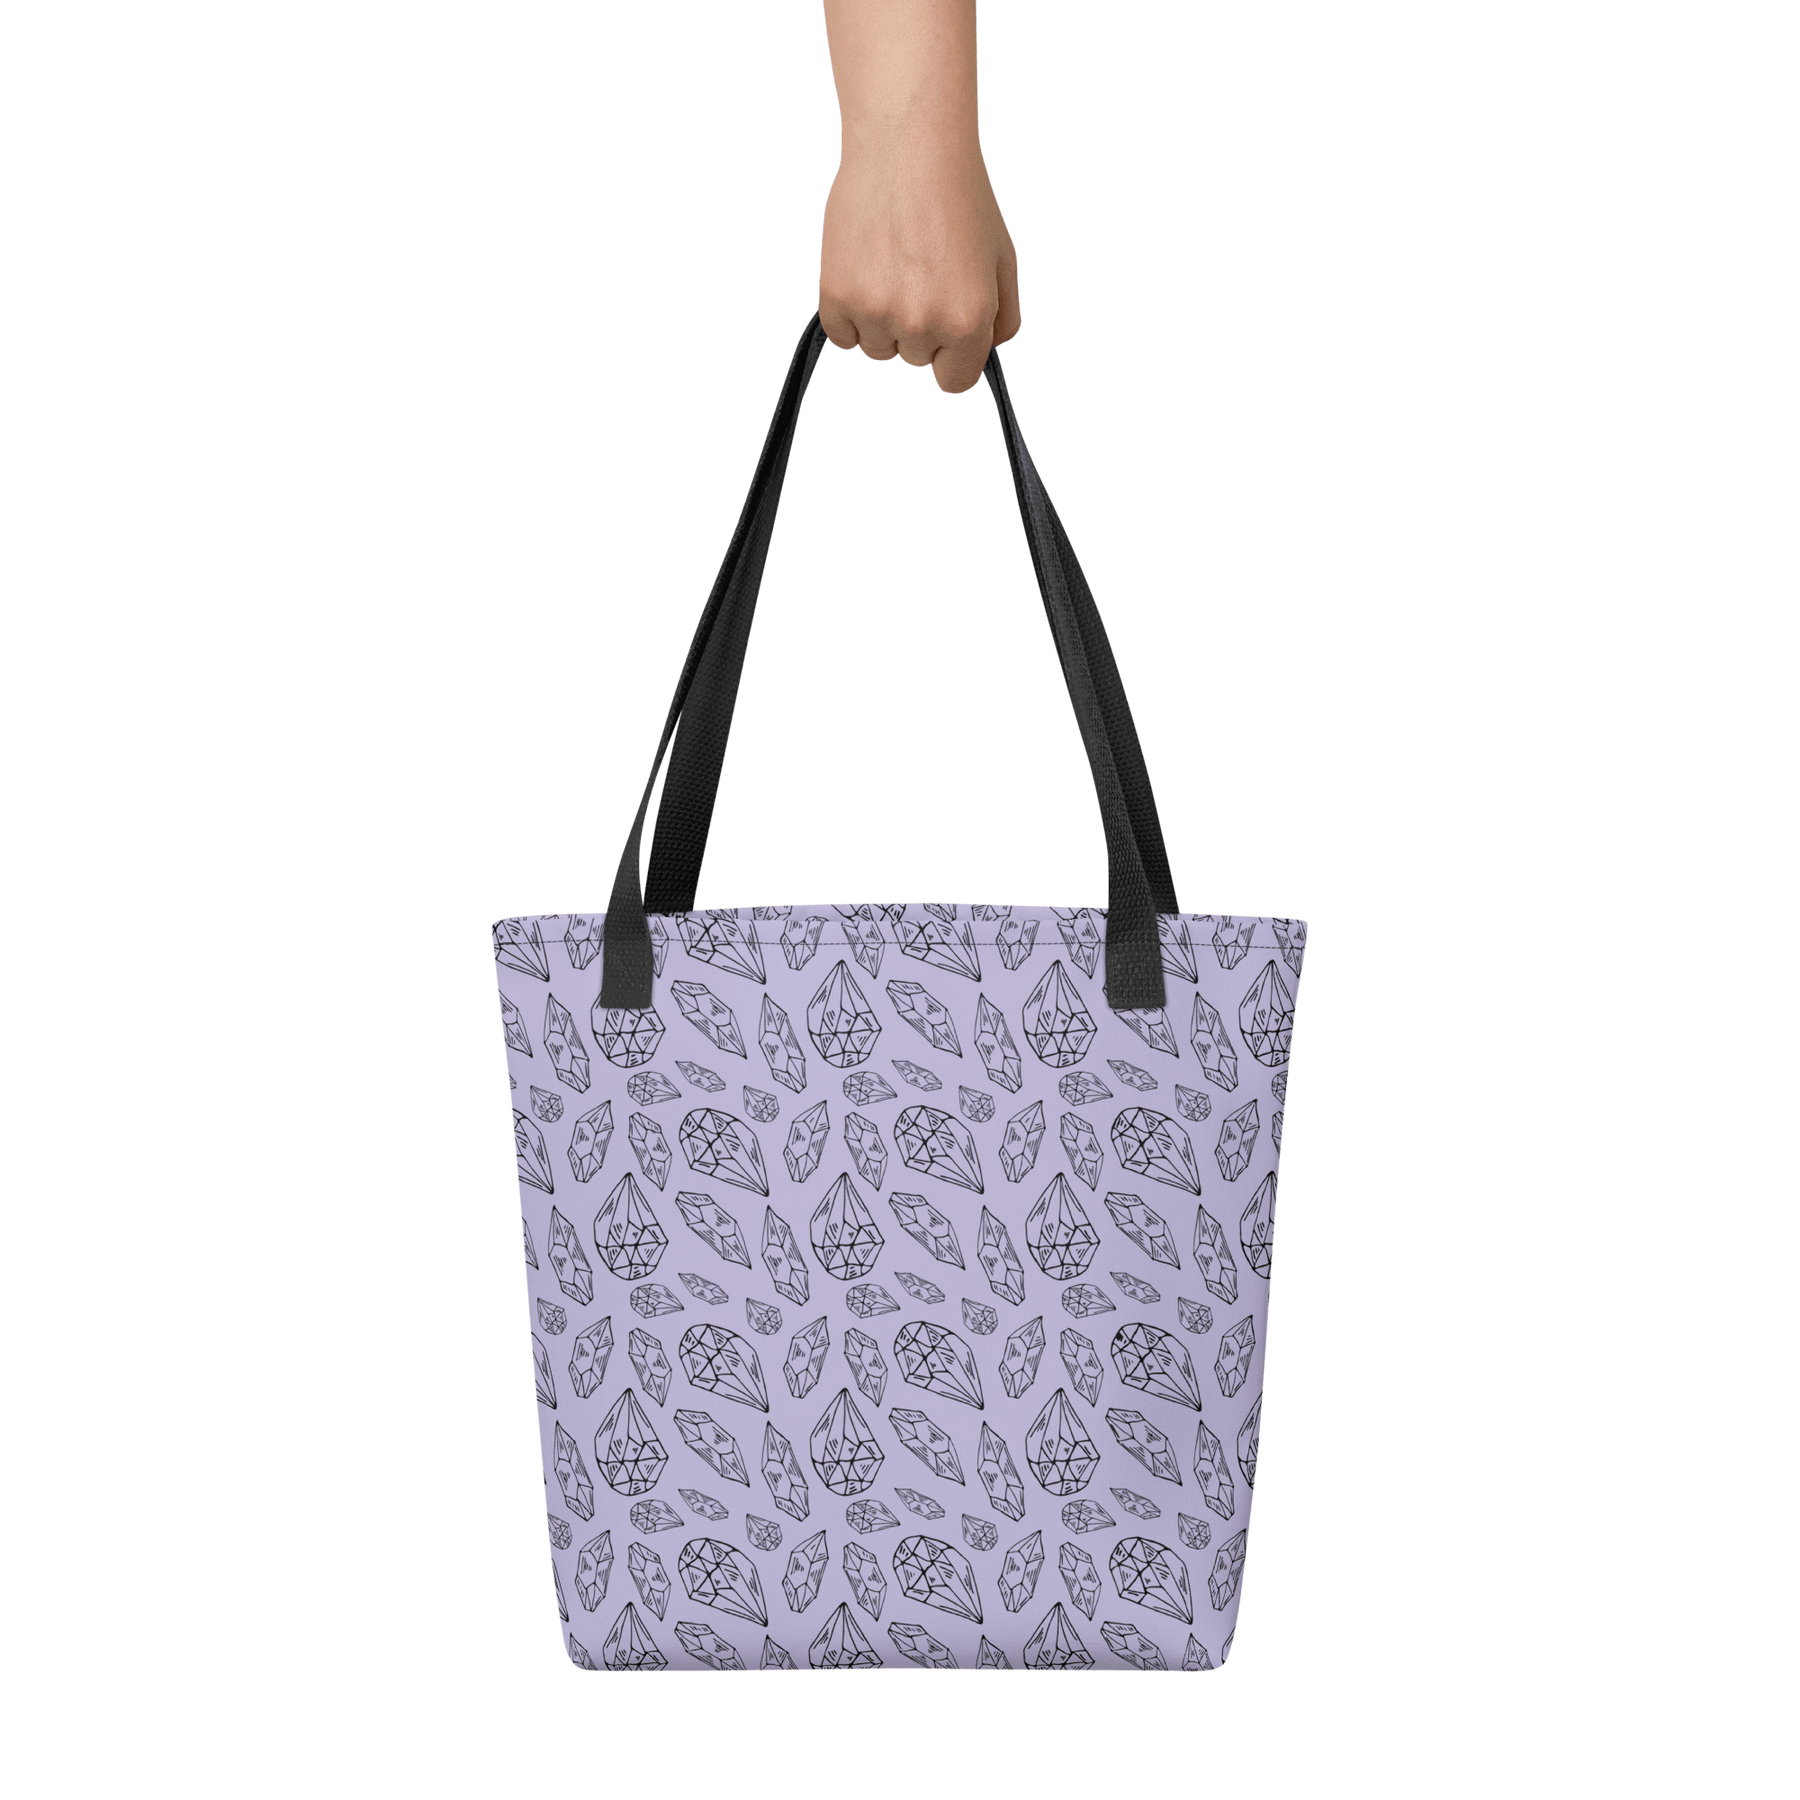 Crystal Queen Tote Bag - Goth Cloth Co.7153820_4533